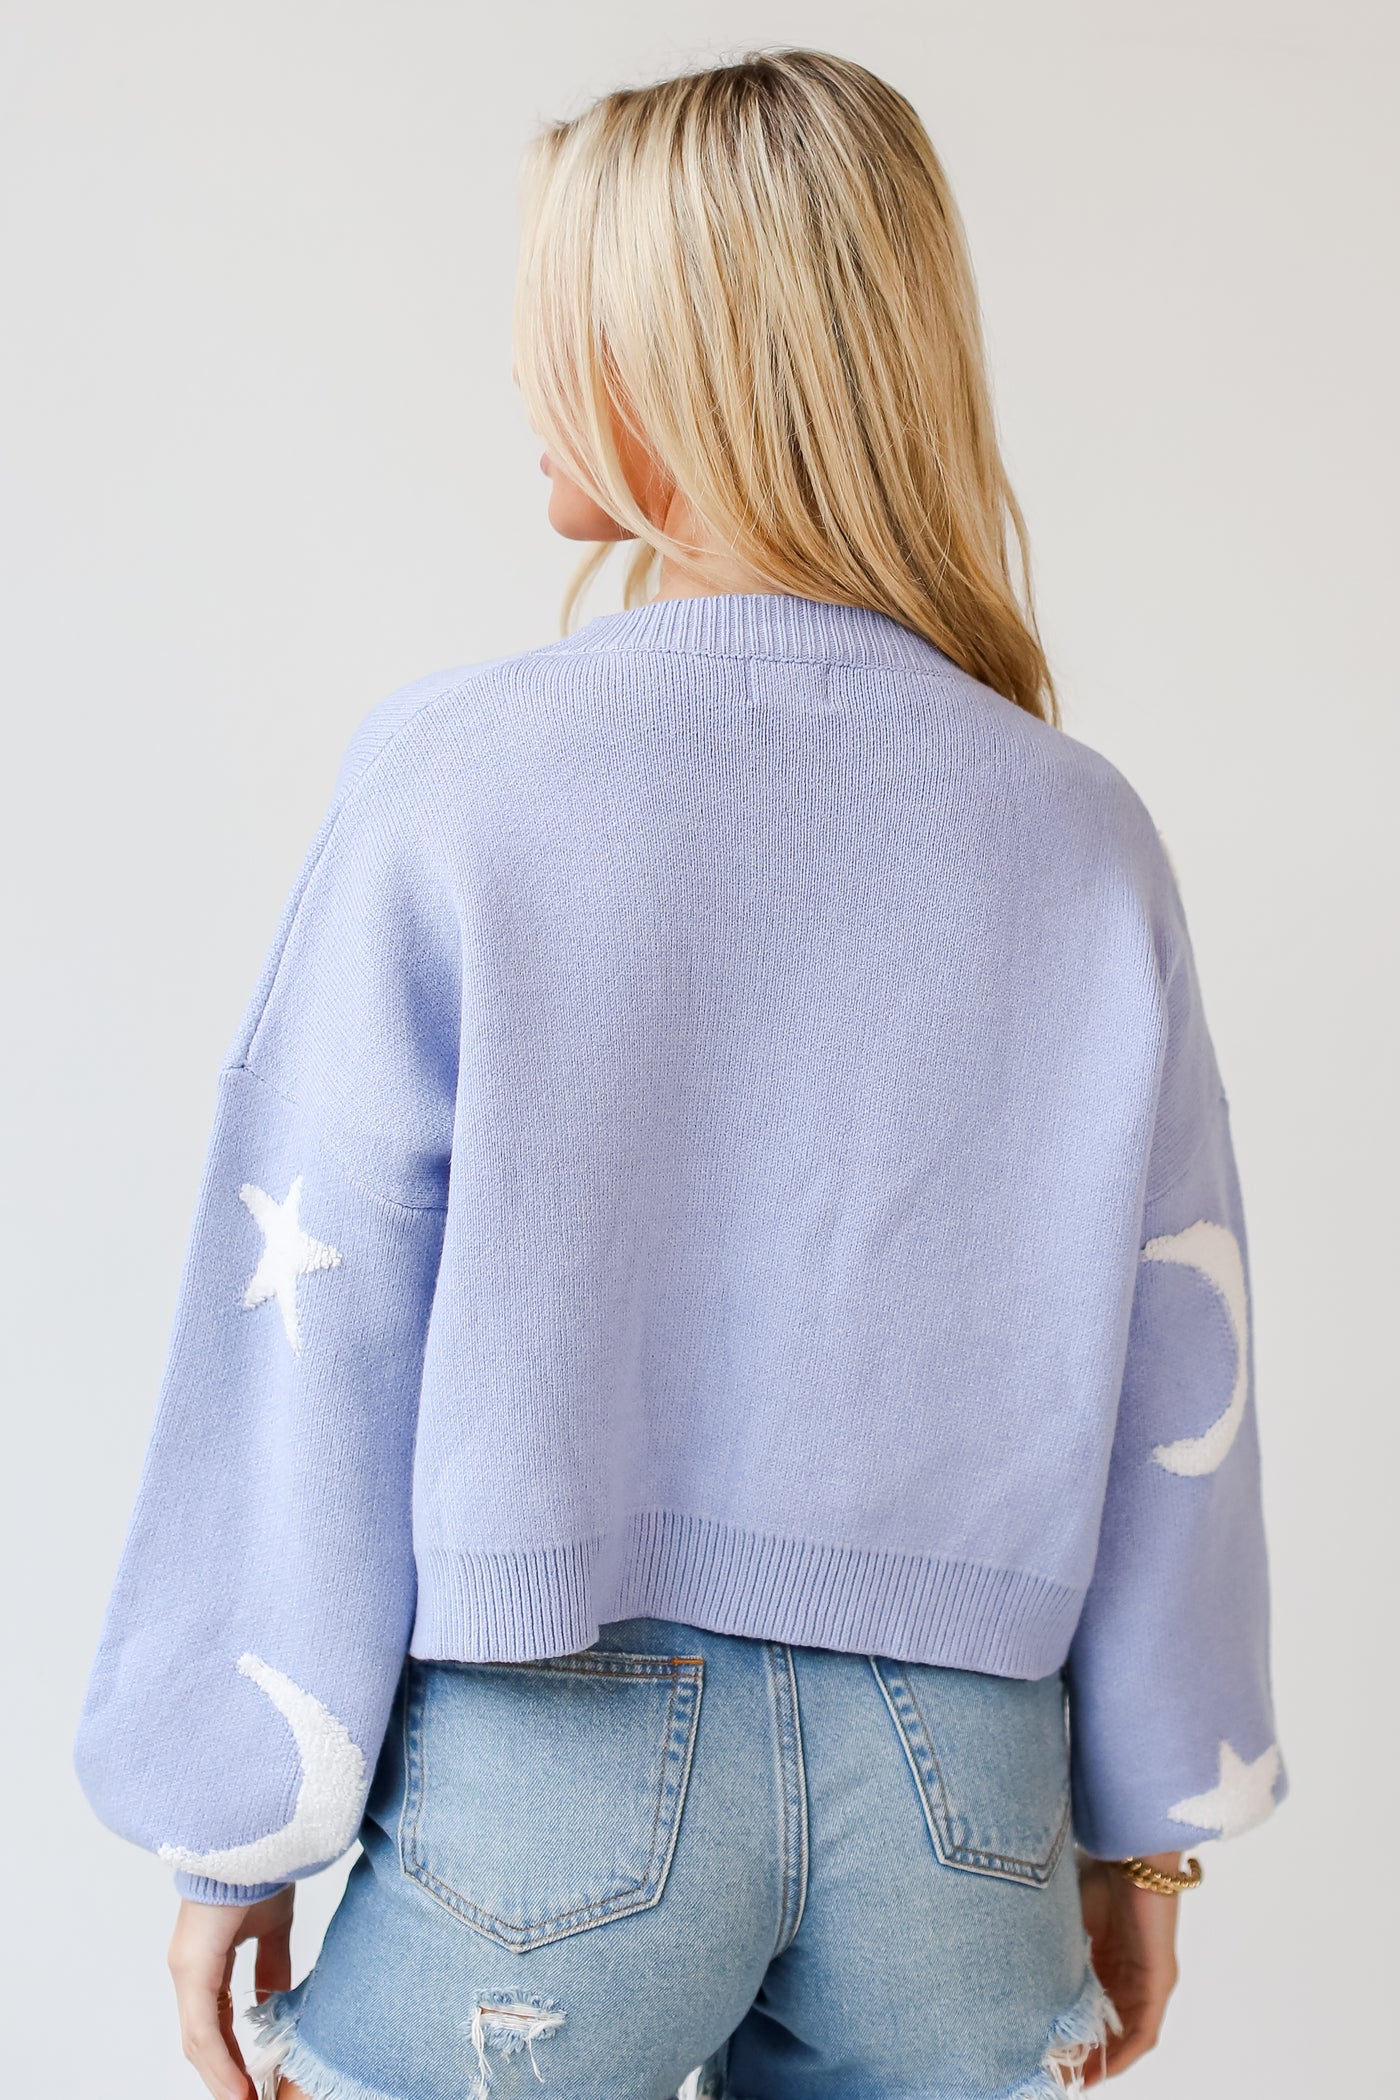 blue star and moon Sweater back view